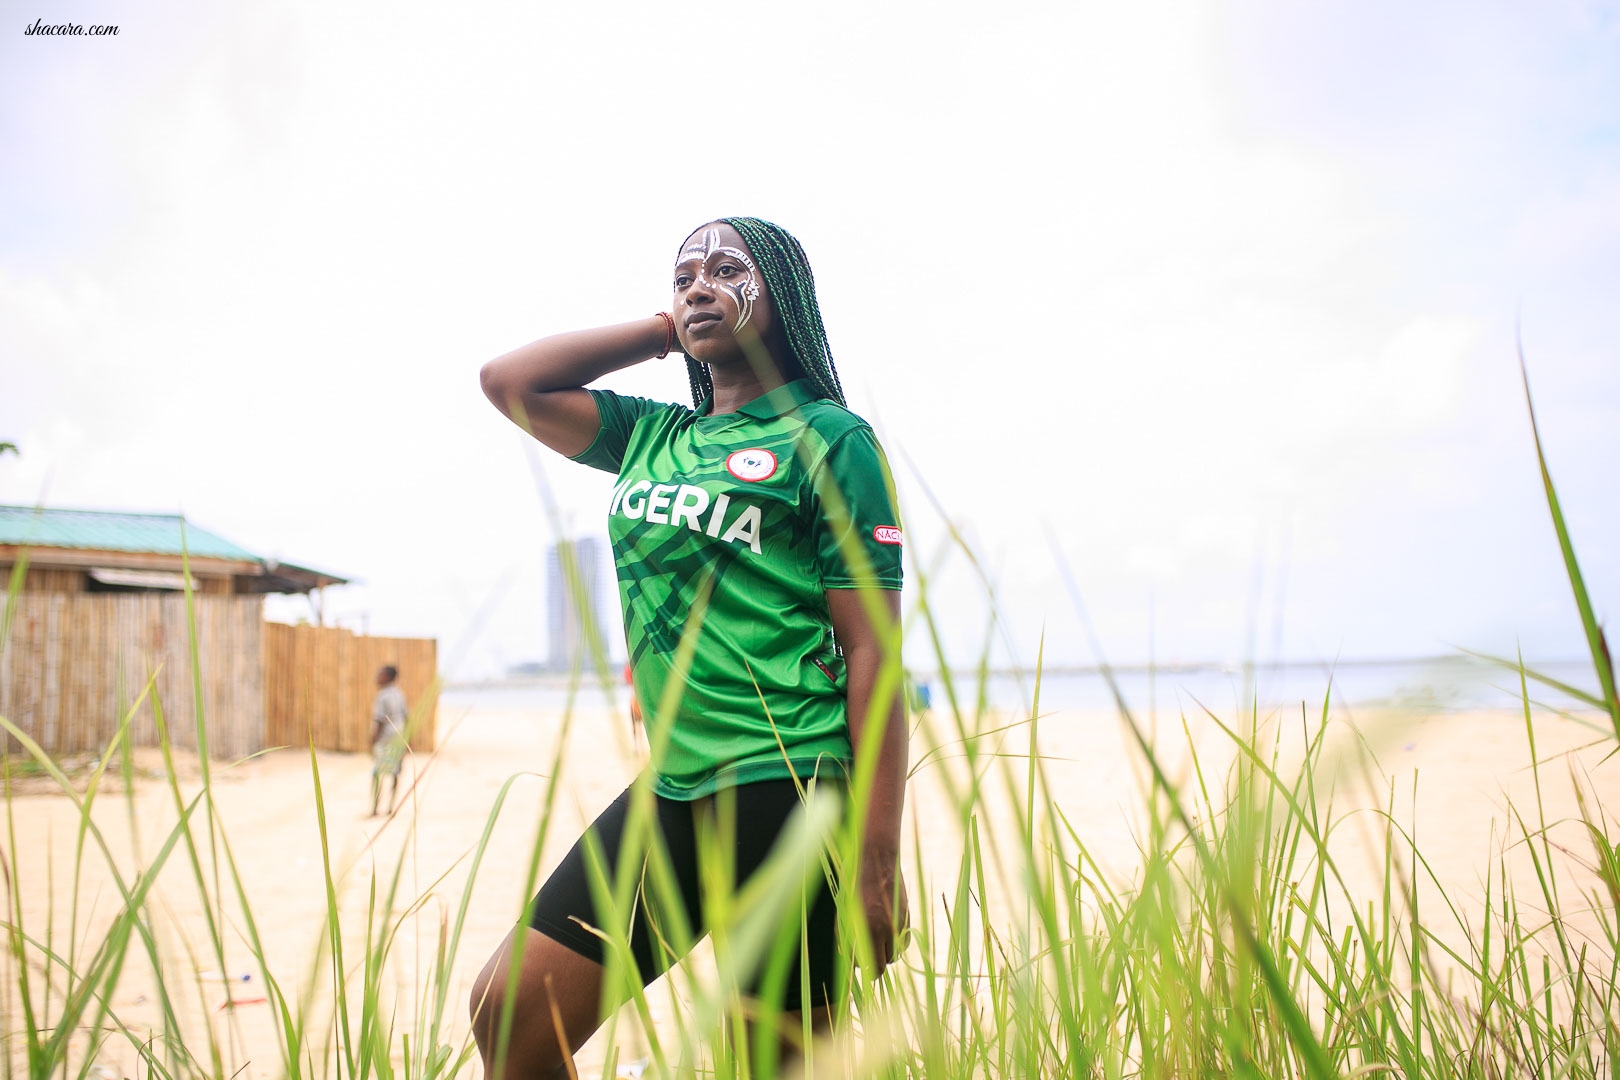 NACK Apparel Promotes Patriotism And Unity Amongst Nigerians In Latest Campaign